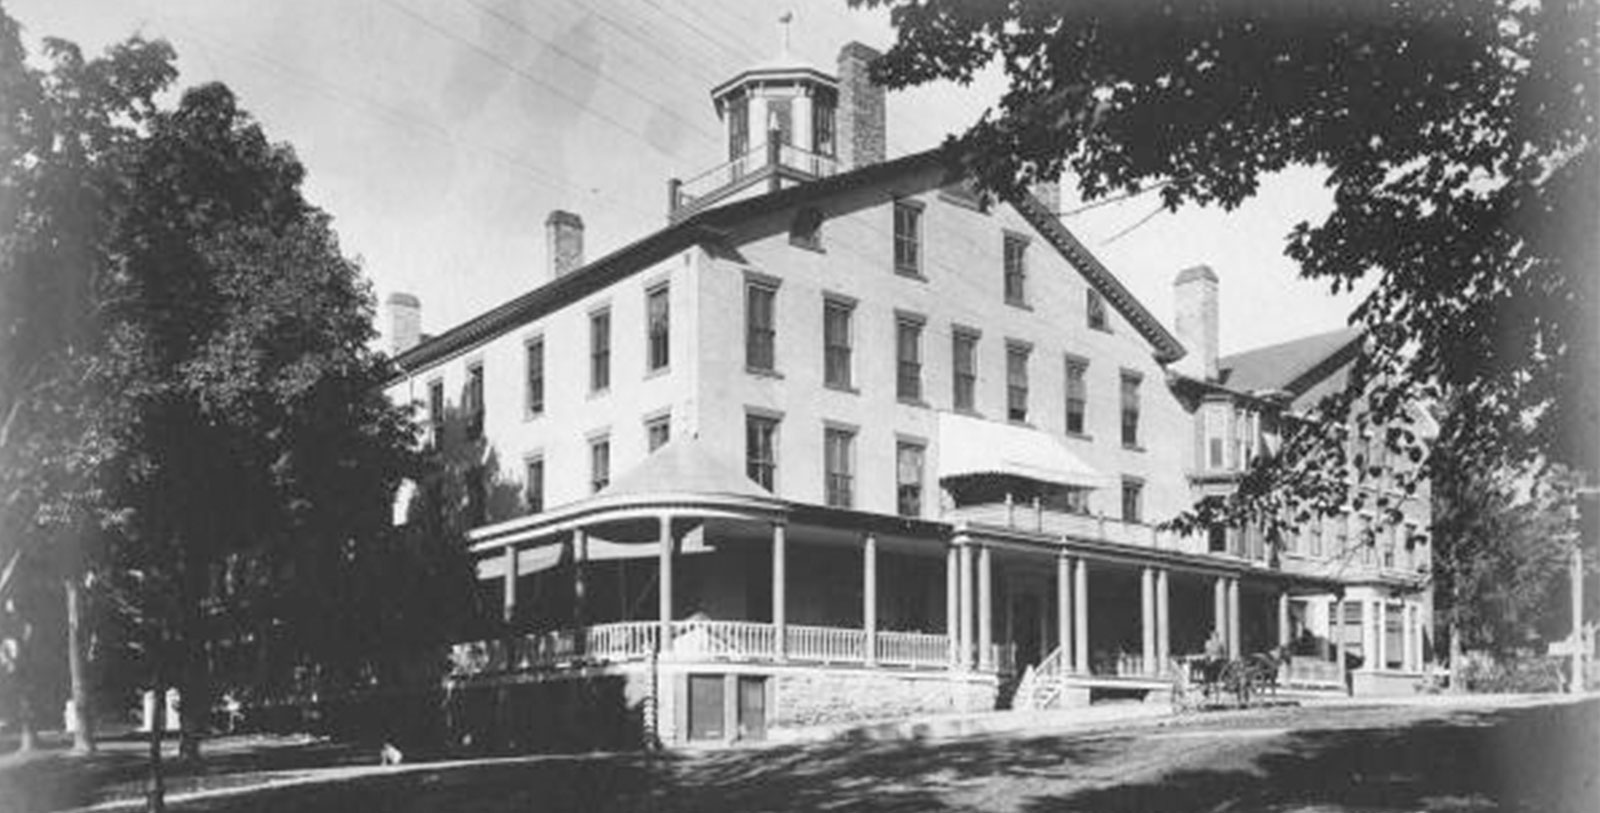 Discover the historic accommodations of this historic hotel, originally built in 1827.